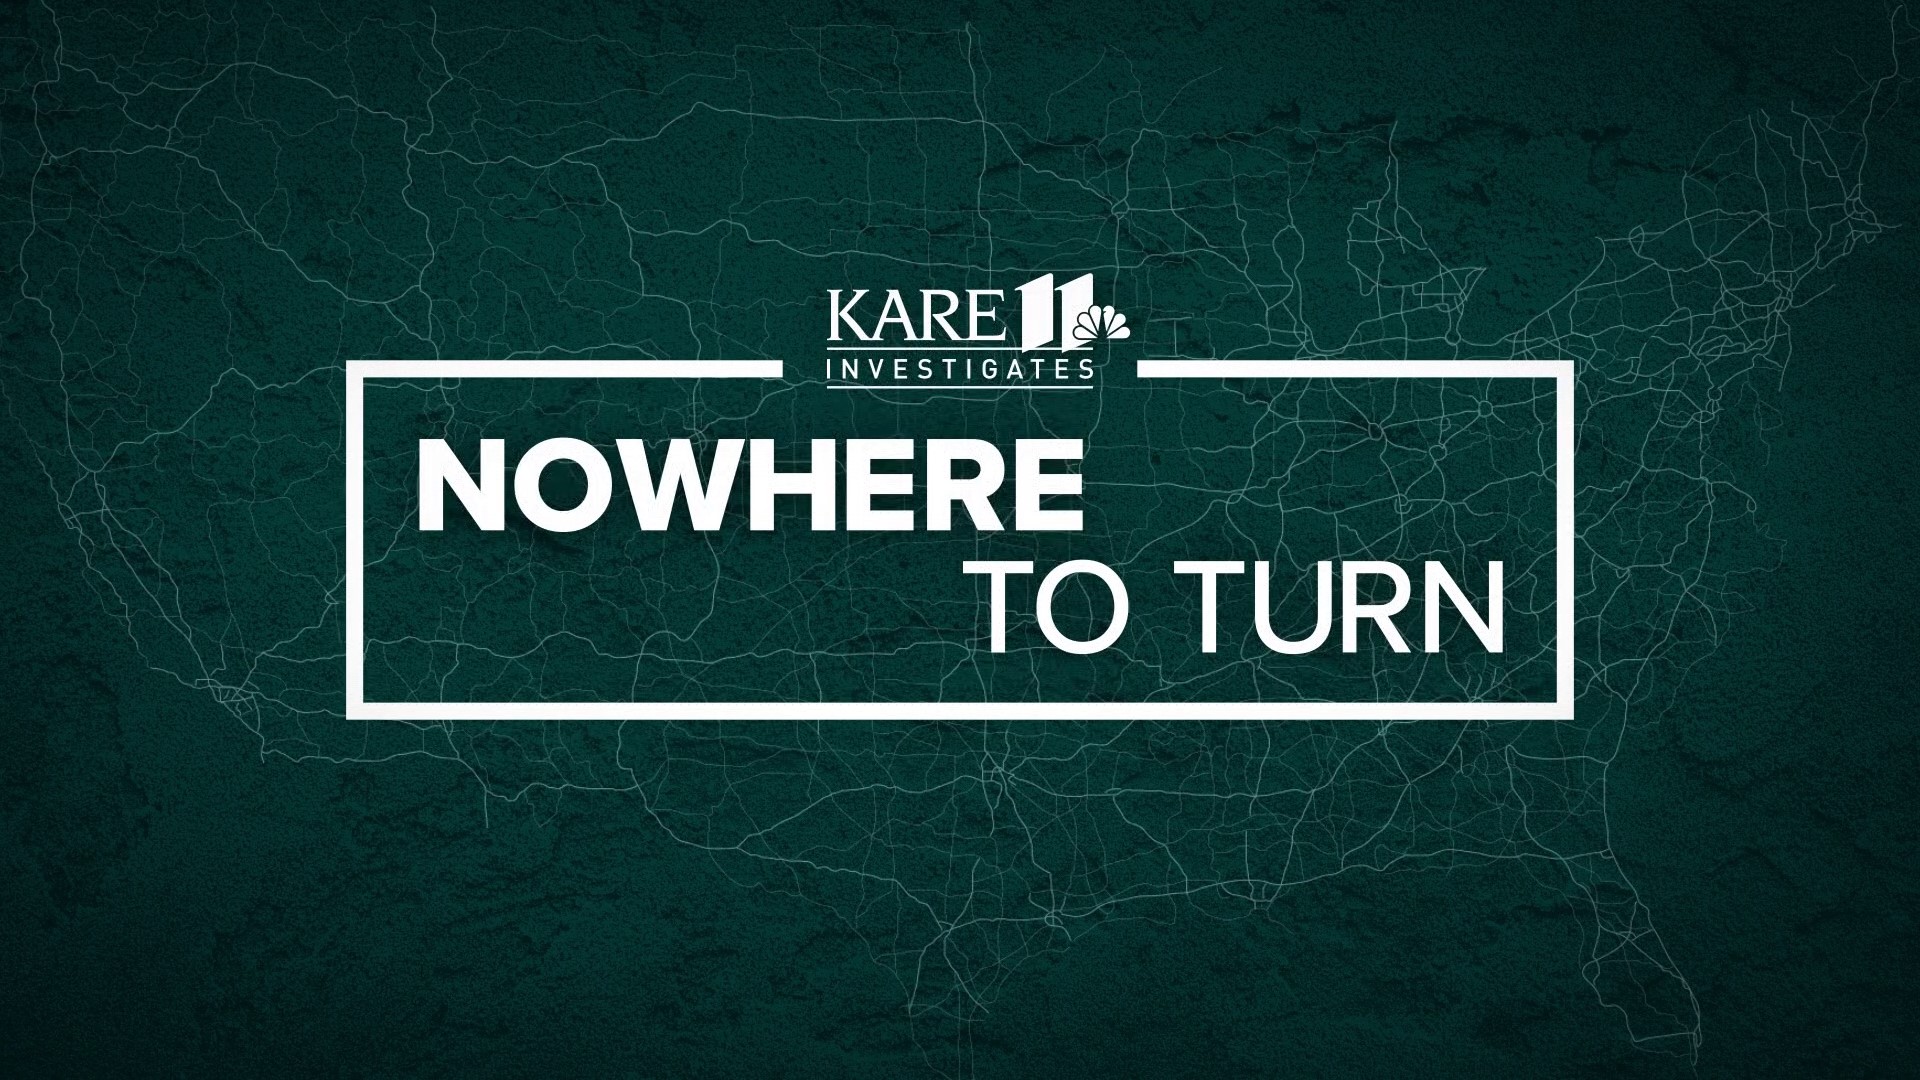 A KARE 11 investigation exposed widespread sexual assault by private contractors paid by tax dollars to transport inmates and pretrial detainees.